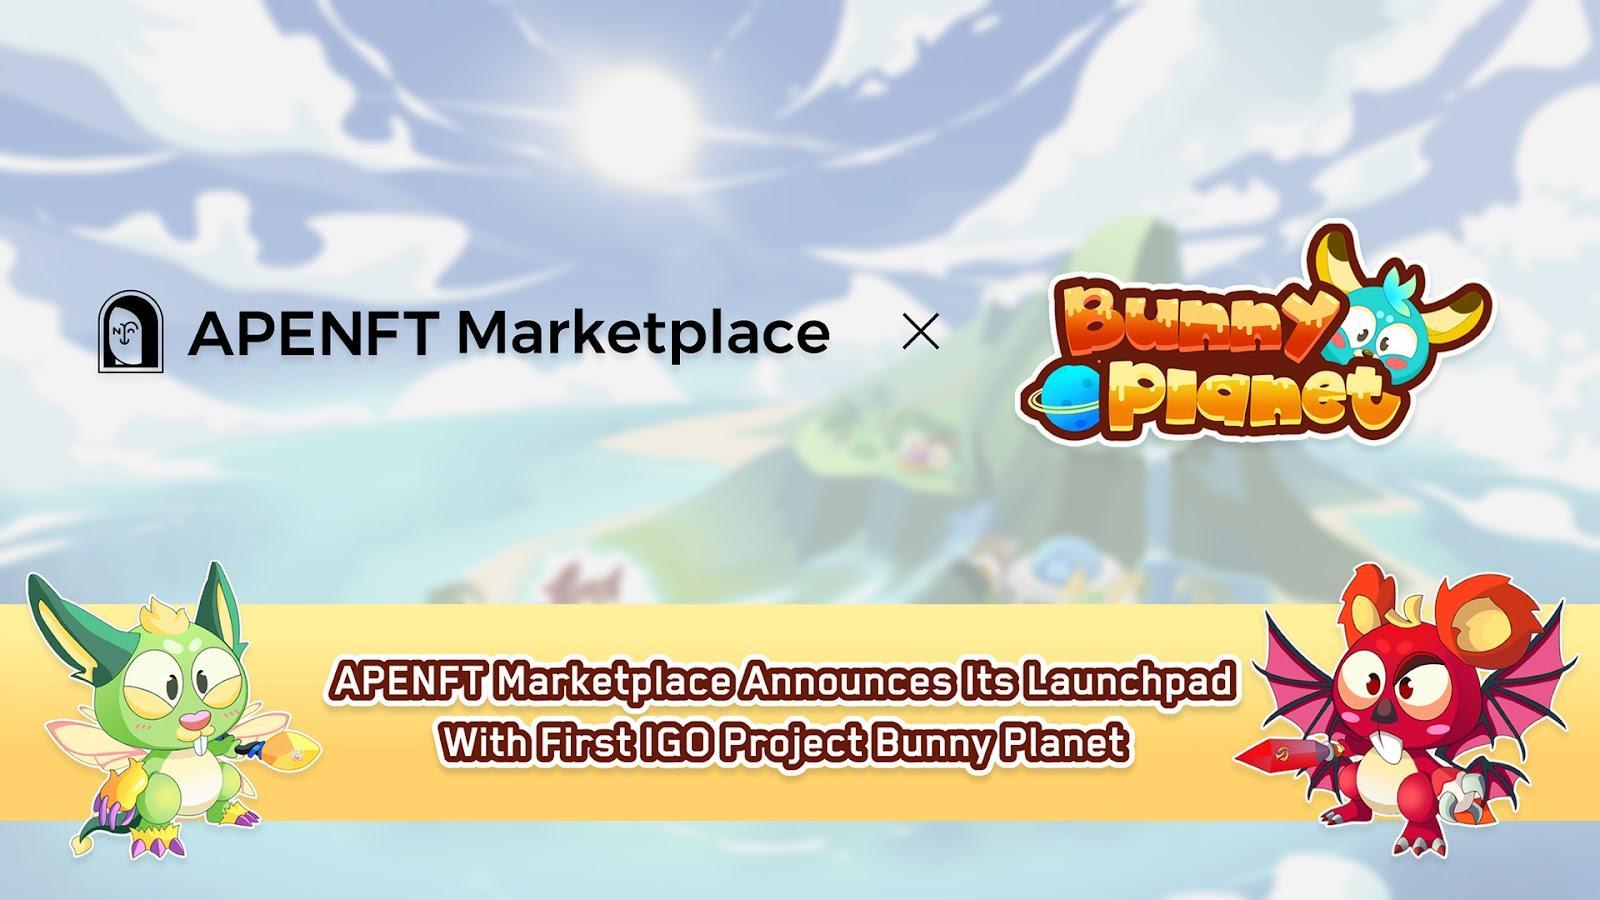 APENFT Marketplace Announces its Launchpad with First IGO Project Bunny Planet 6